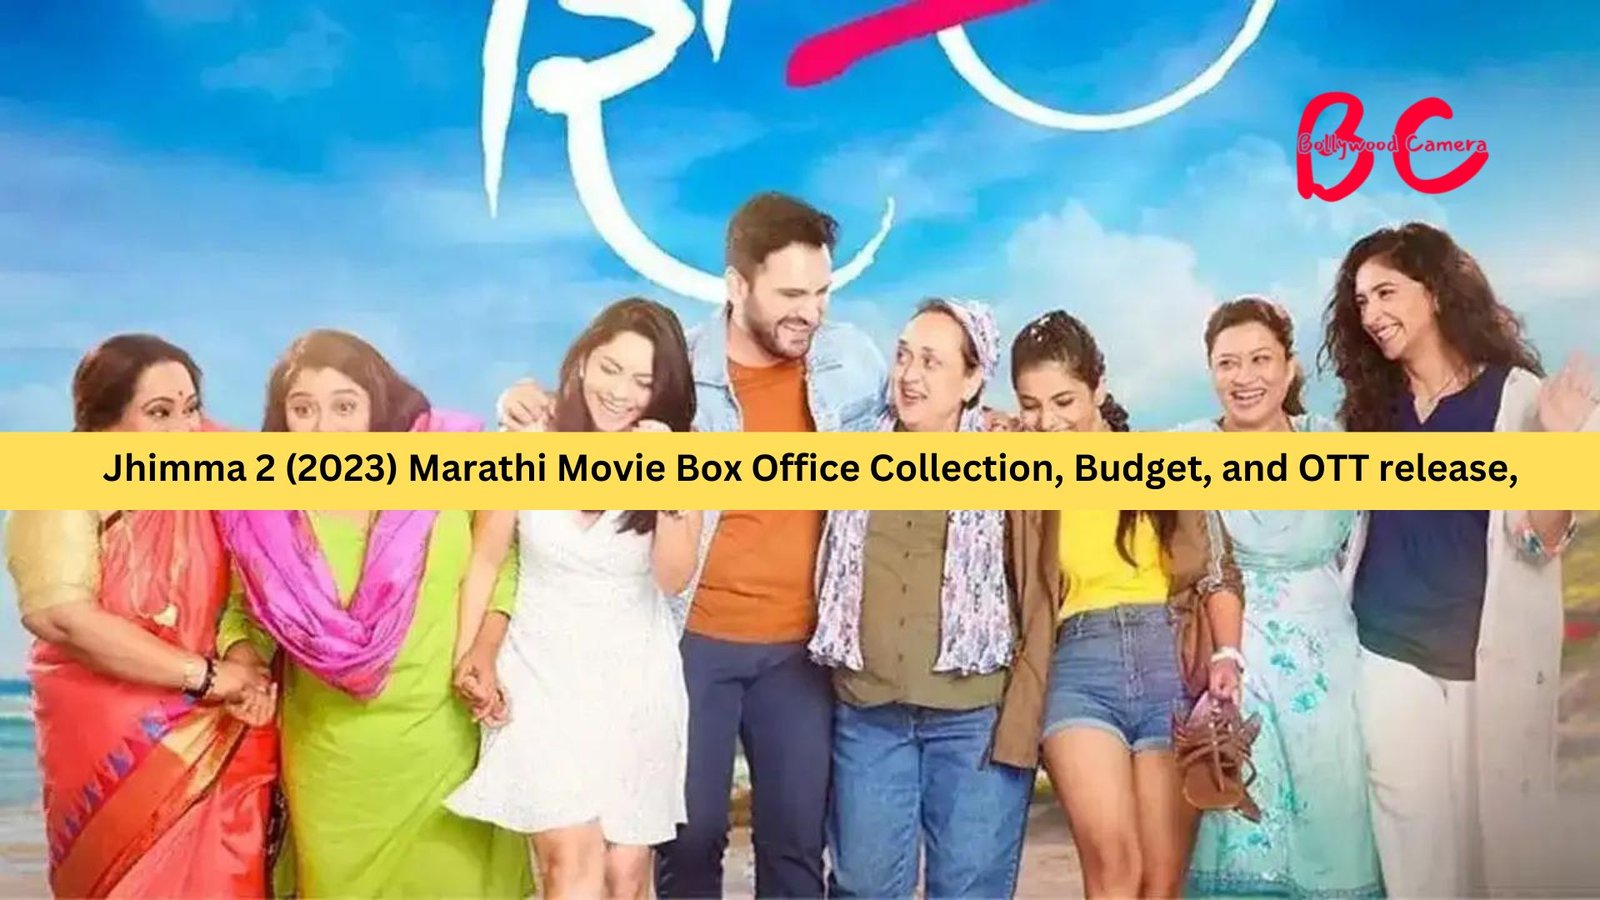 Jhimma 2 (2023) Marathi Movie Box Office Collection, Budget, hit or flop, ott release